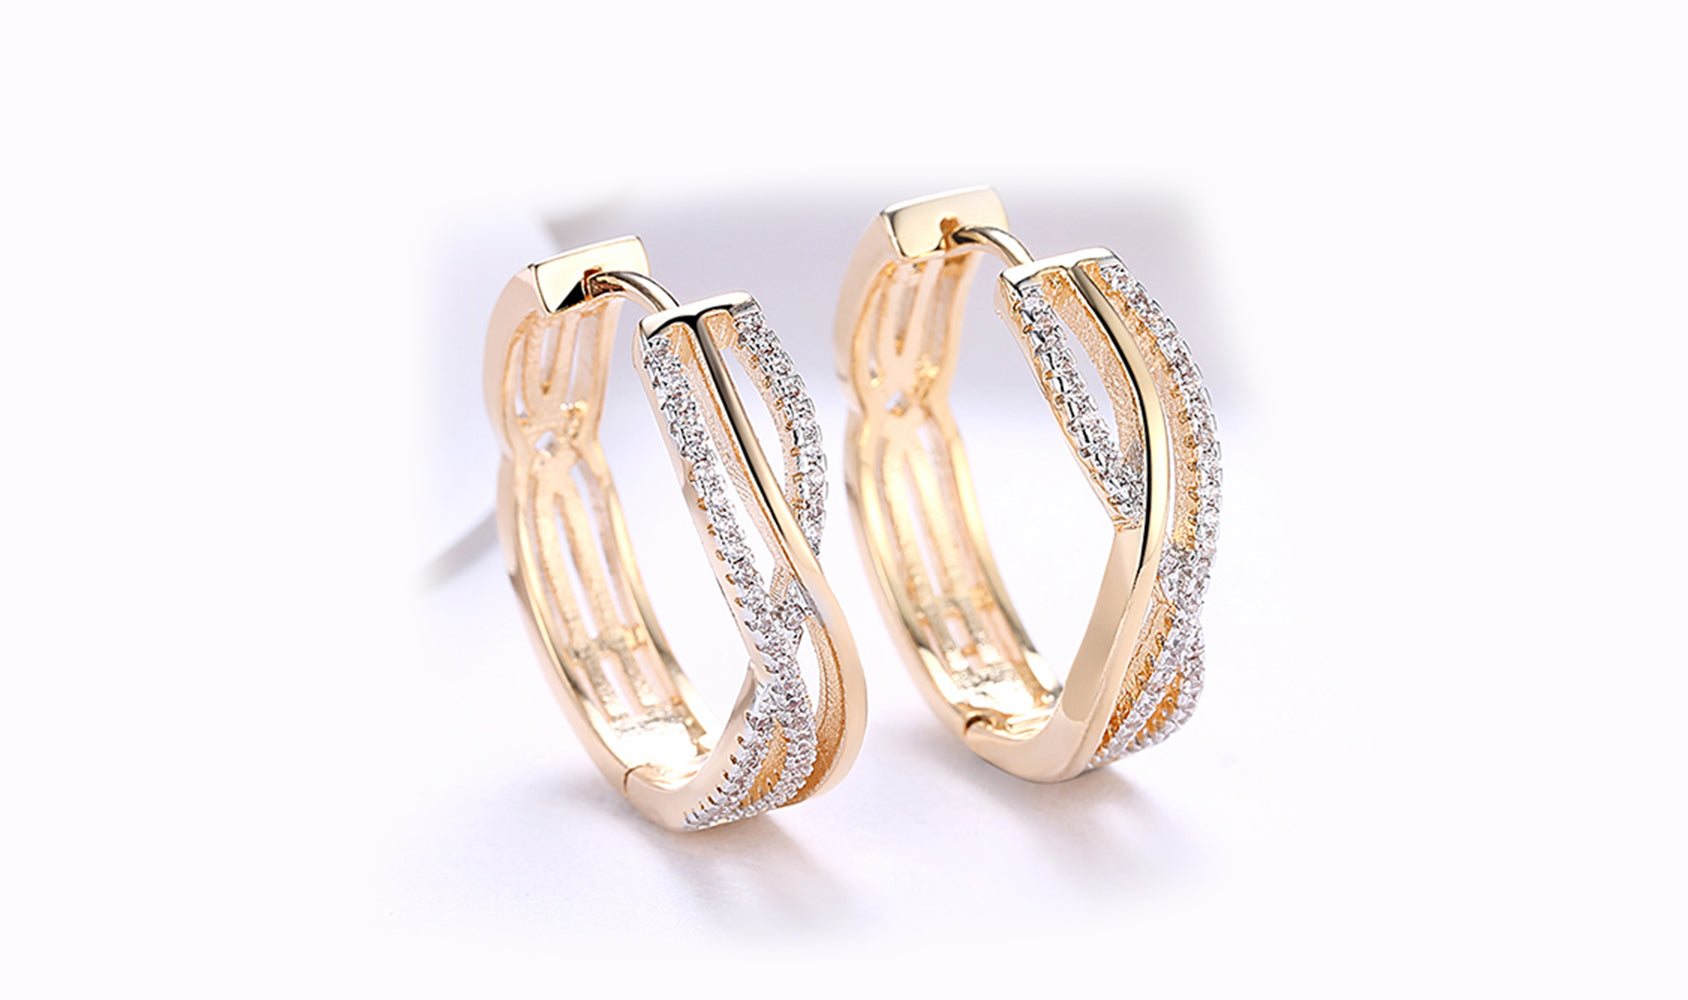 Twisted Abstract Clip-On Earrings with 14K Gold Plating and White Sapphire Stones - Jewelry & Watches - Bijou Her -  -  - 